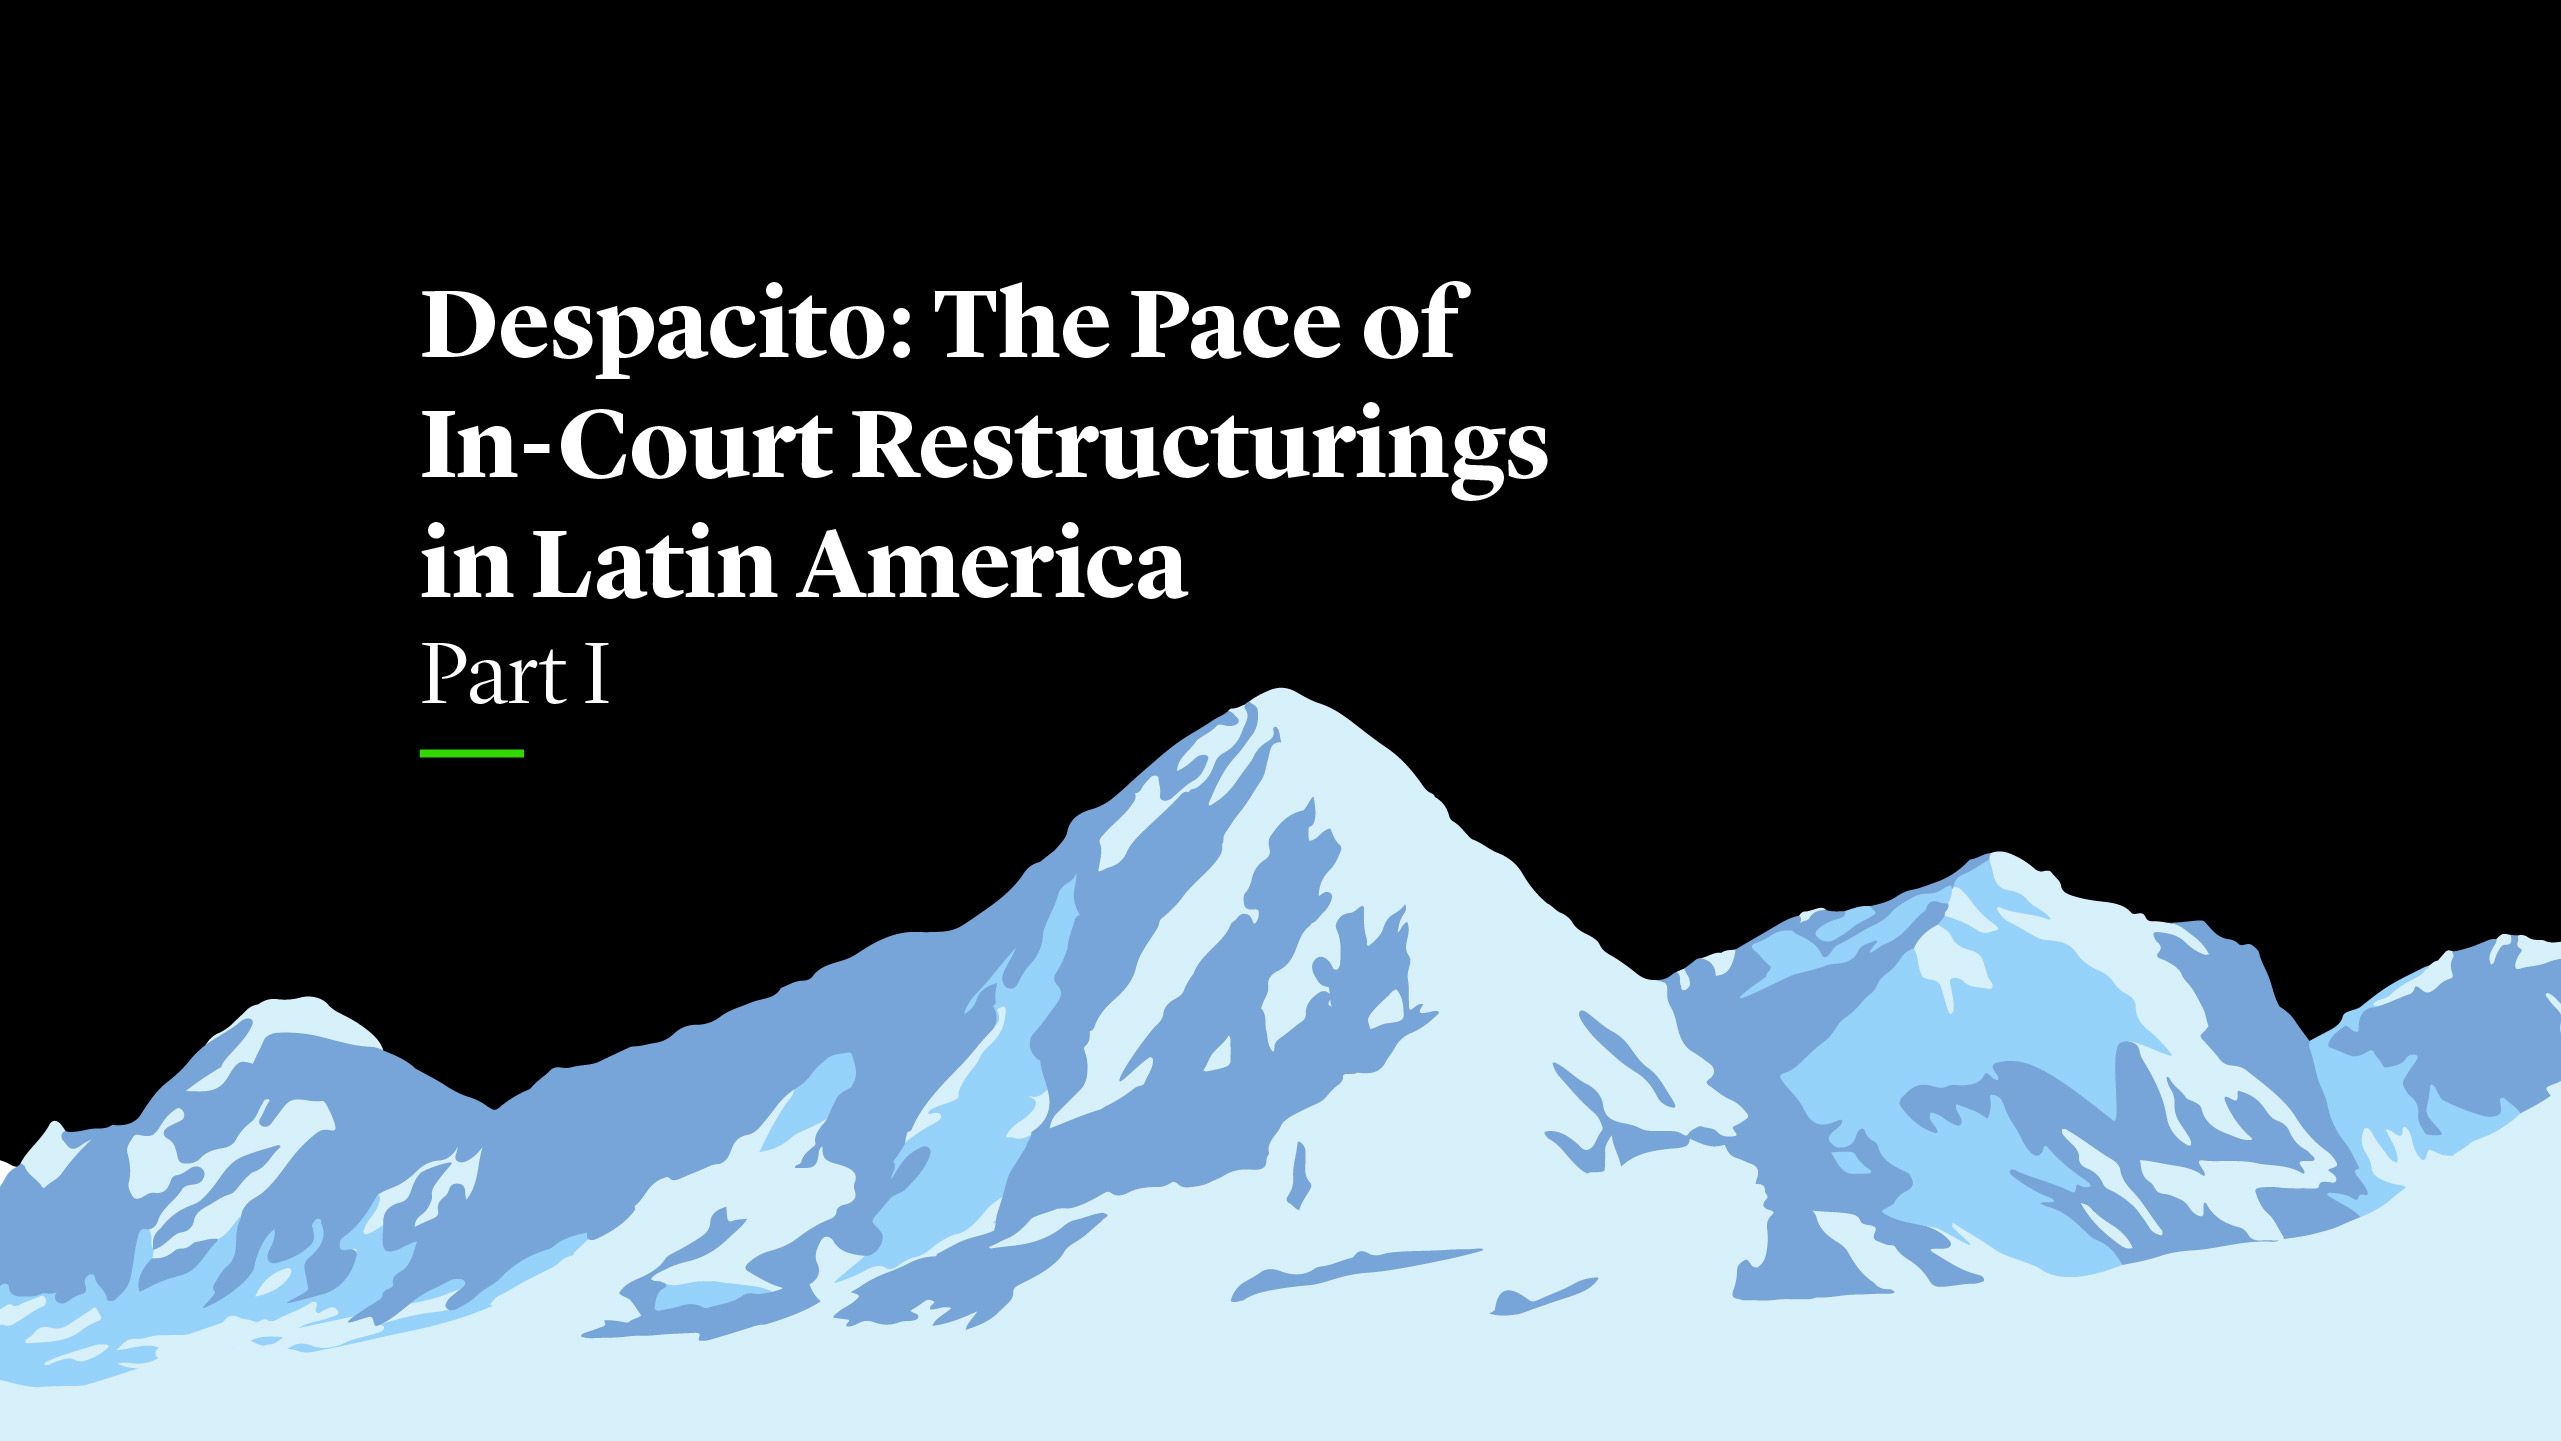 Despacito: The Pace of In-court Restructurings in Latin America  (Part I)